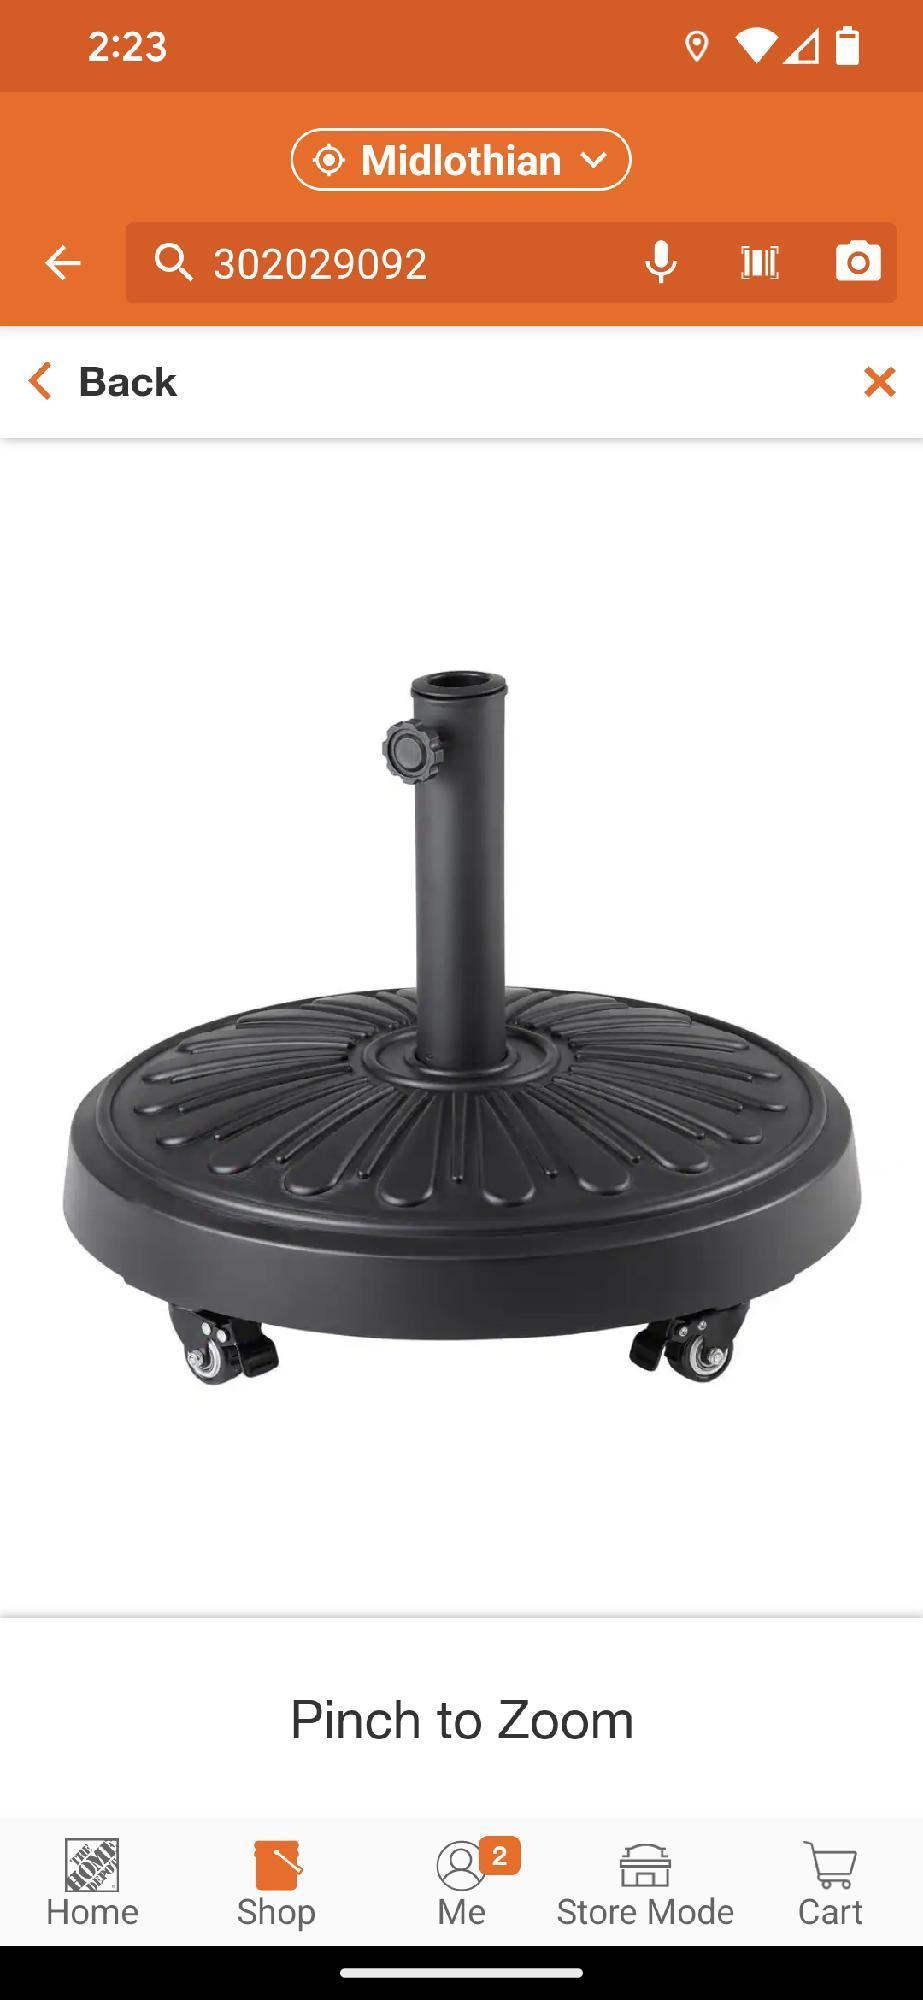 StyleWell 50 lbs. Concrete and Resin Patio Umbrella Base in Black, Appears to be New in Factory